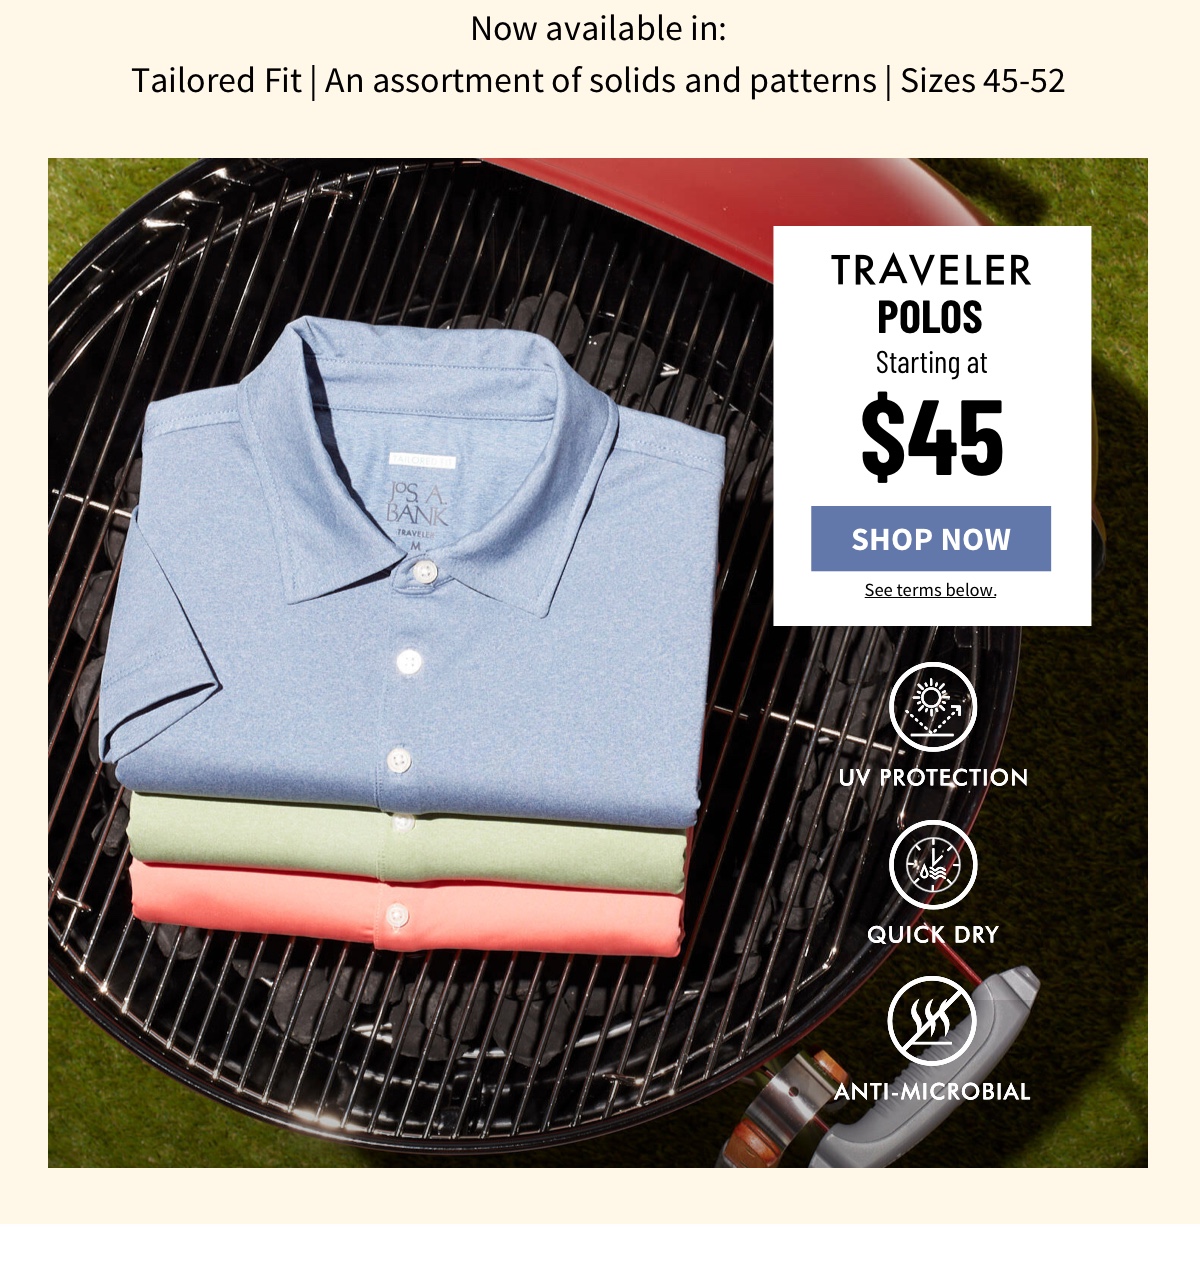 Now available in: Tailored Fit | An assortment of solids and patterns | Sizes 45-52  Traveler Polos Starting at $45 Shop Now See terms below.  UV Protection Quick Dry Anti-Microbial